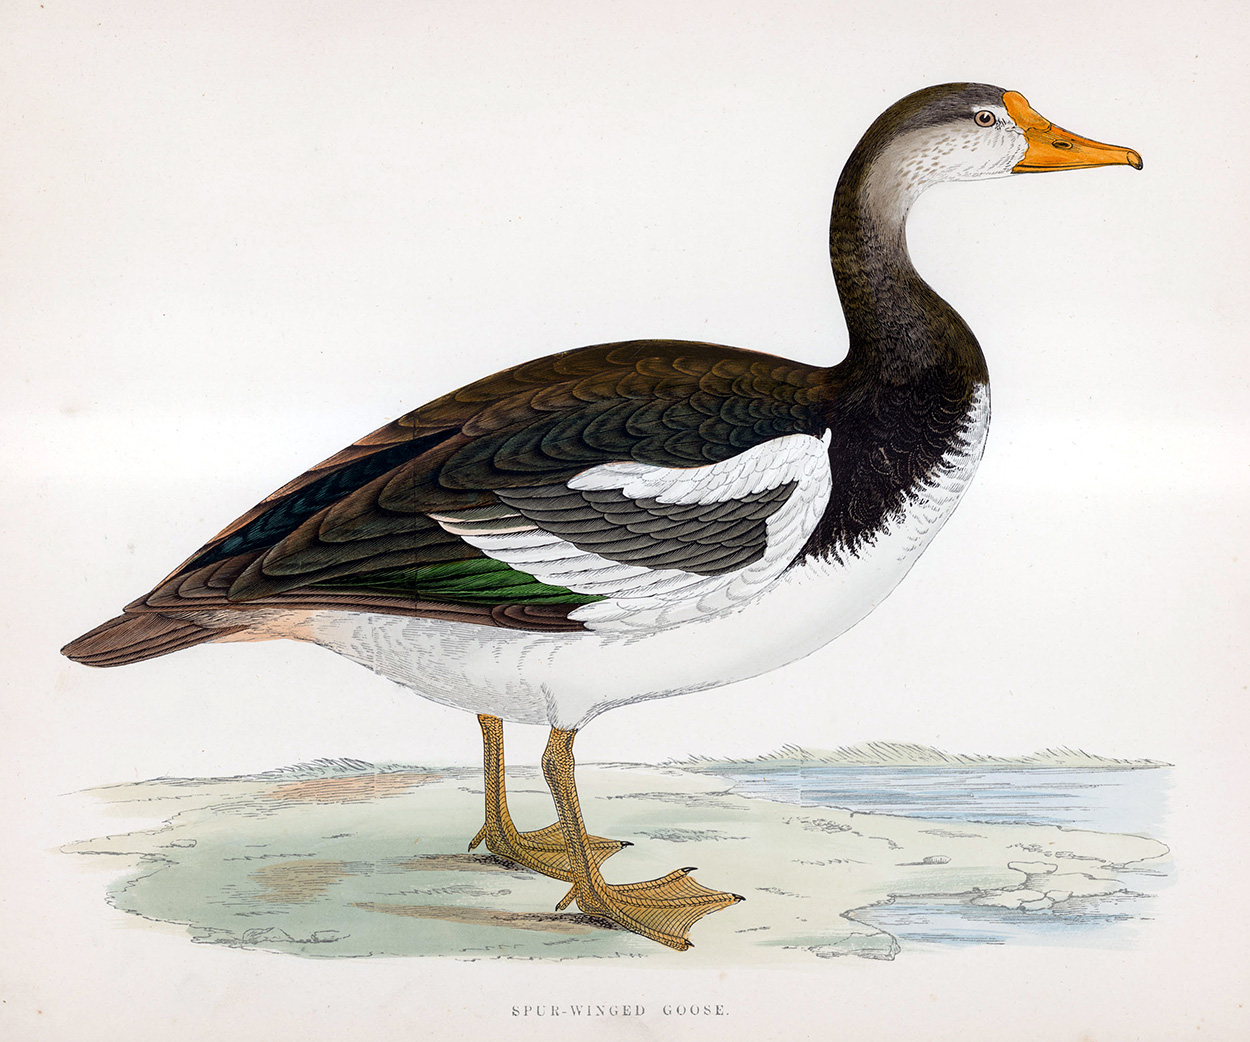 Spur Winged Goose - hand coloured lithograph 1891 (Print) art by Beverley R Morris at The Illustration Art Gallery